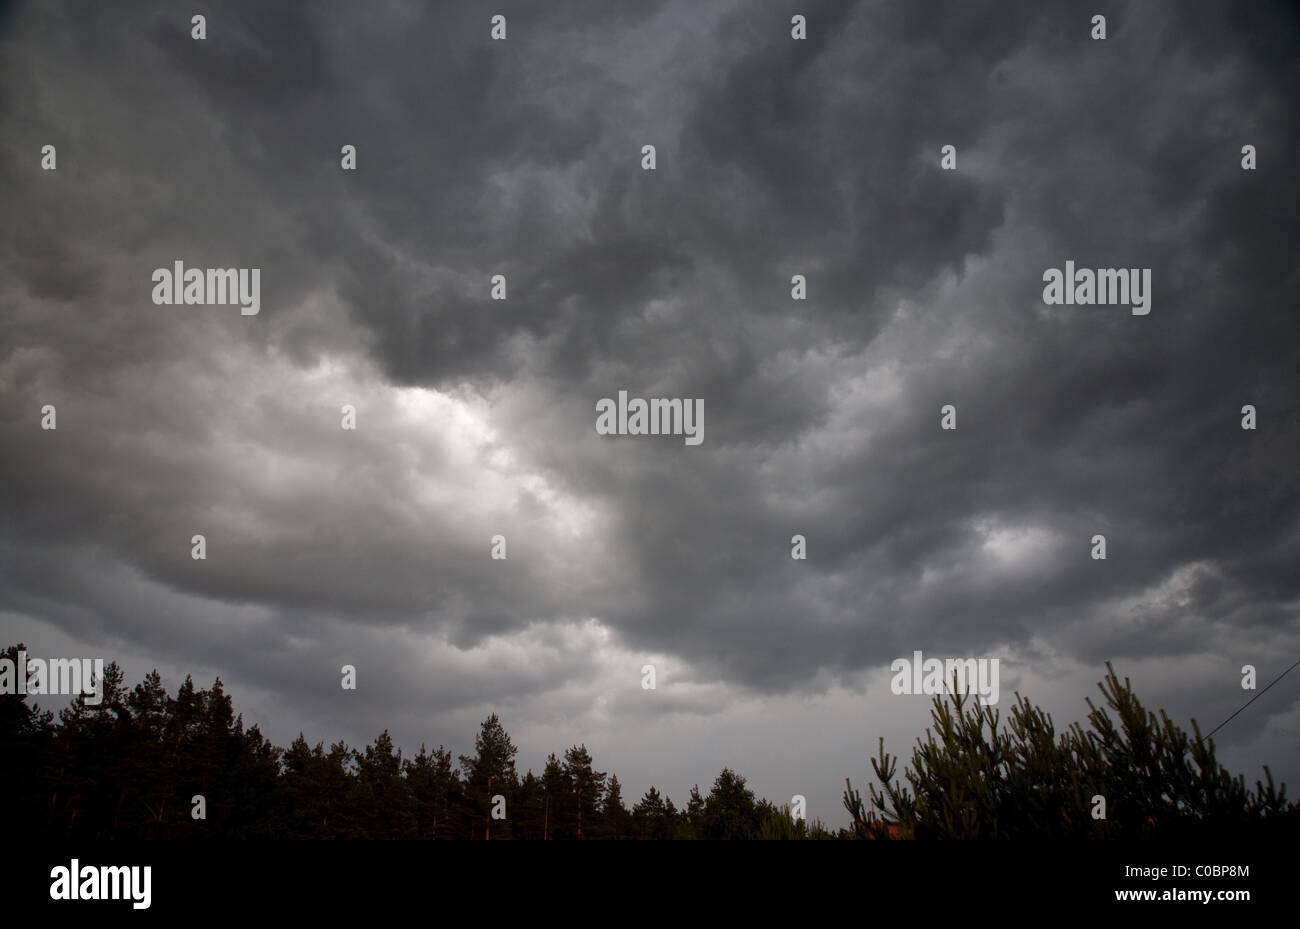 Stormy cloud background Stock Photo